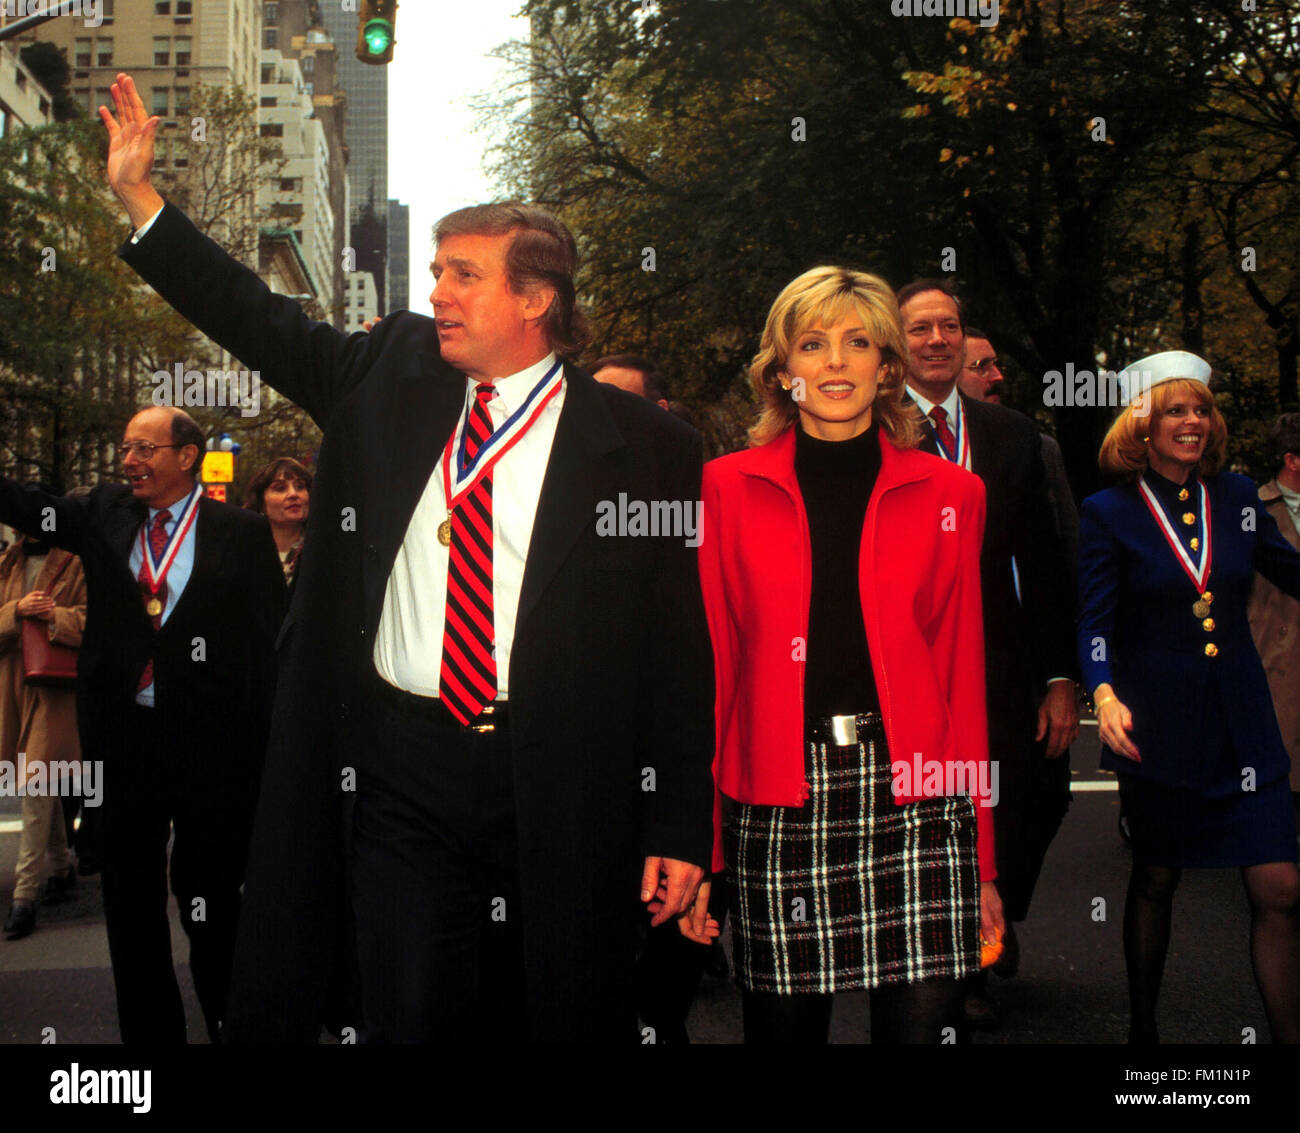 Donald Trump and Marla Maples march in the New York City Veteran's Day Parade on November 11, 1995.  Maples auctioned off a 7.45-carat diamond engagement   ring received from Donald Trump for $110,000 Friday, June 2, 2000.  Trump gave Maples the ring in the early 1990s. Maples and Trump married in 1993 and  divorced in 1997.  (© Frances M. Roberts) Stock Photo